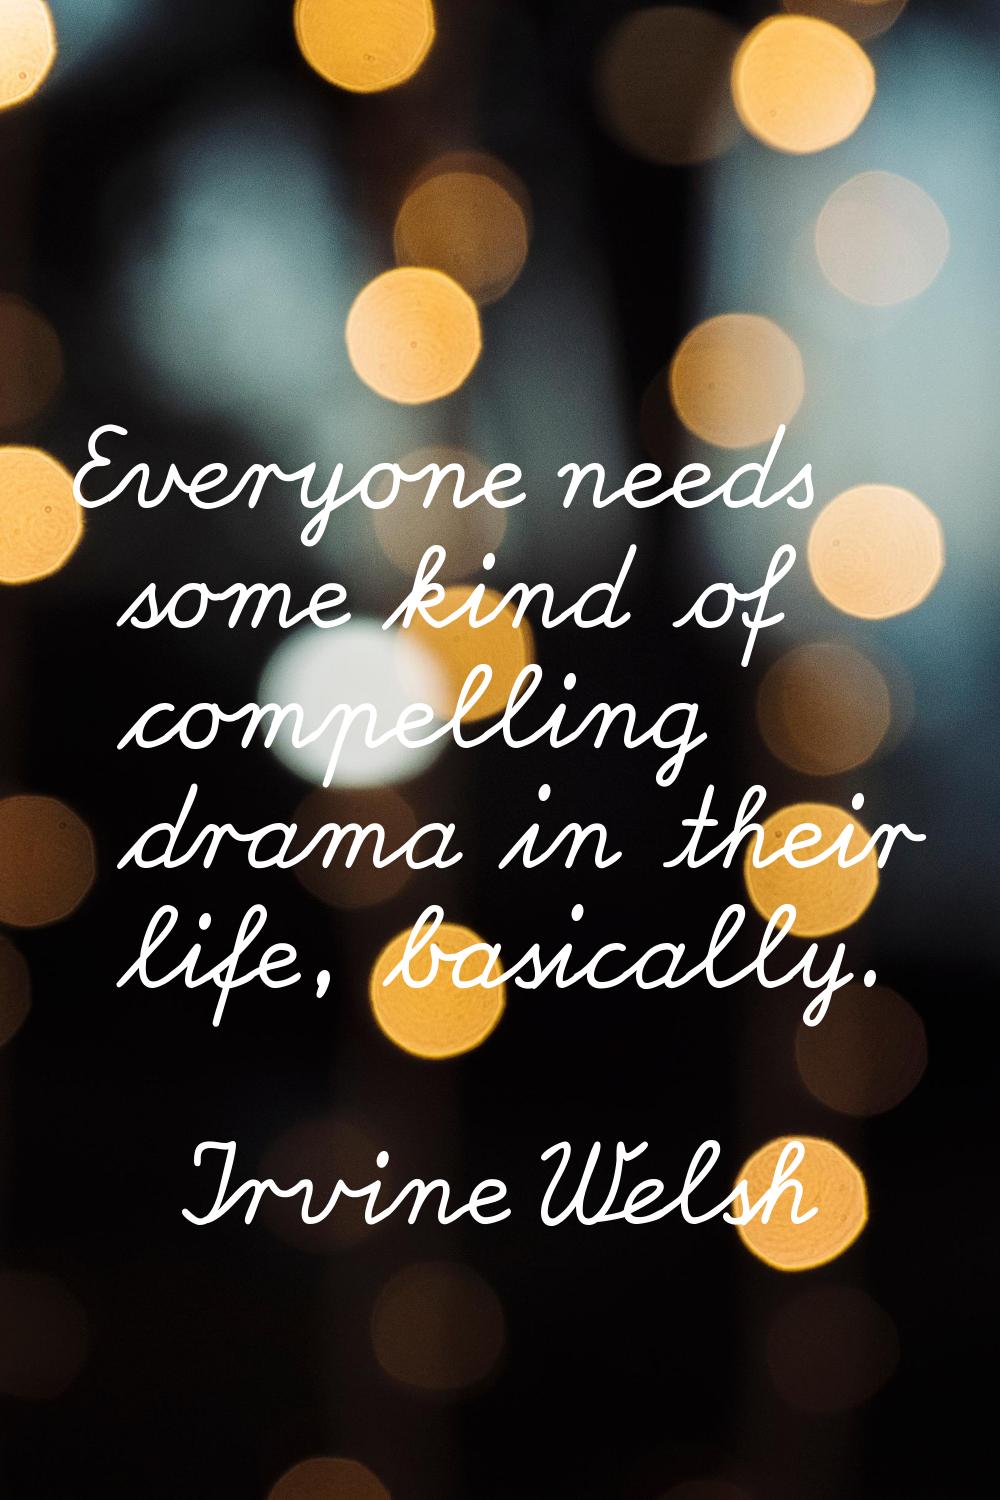 Everyone needs some kind of compelling drama in their life, basically.